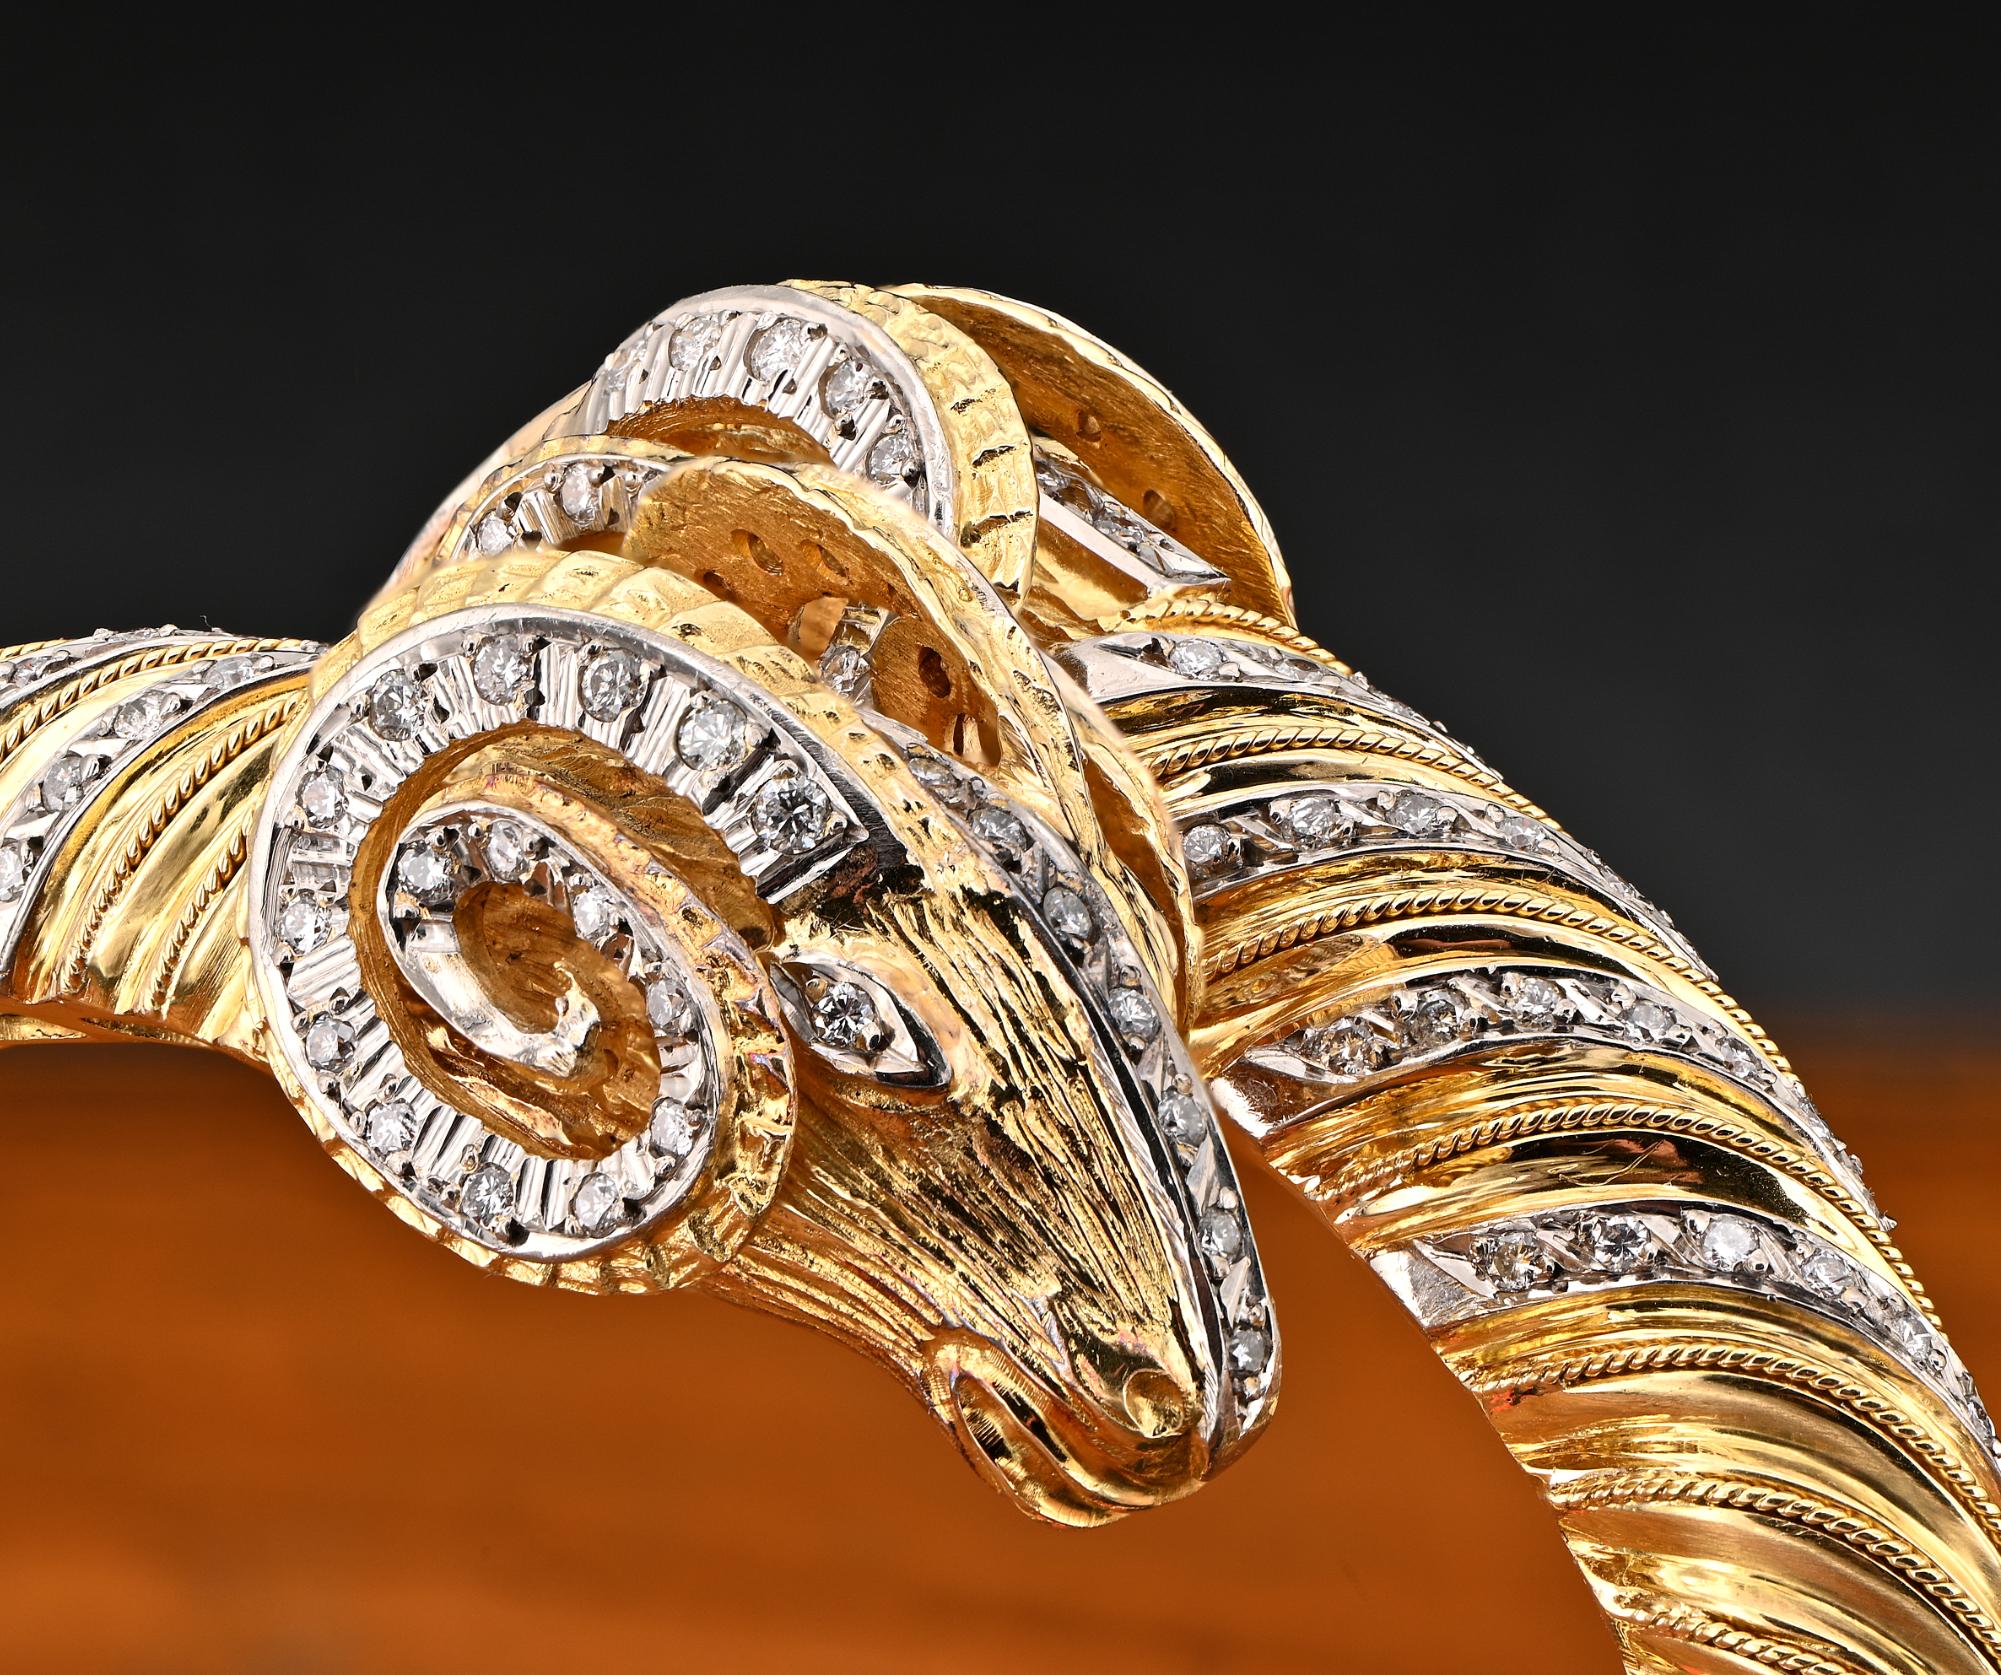 Haute Couture
This stunning bangle is 1970 ca., Italian origin
impressive Etruscan style design with two huge Rams head meeting at the center, realistically sculptured, leading to a big twisted work with fine granulating finishing on the edge for an